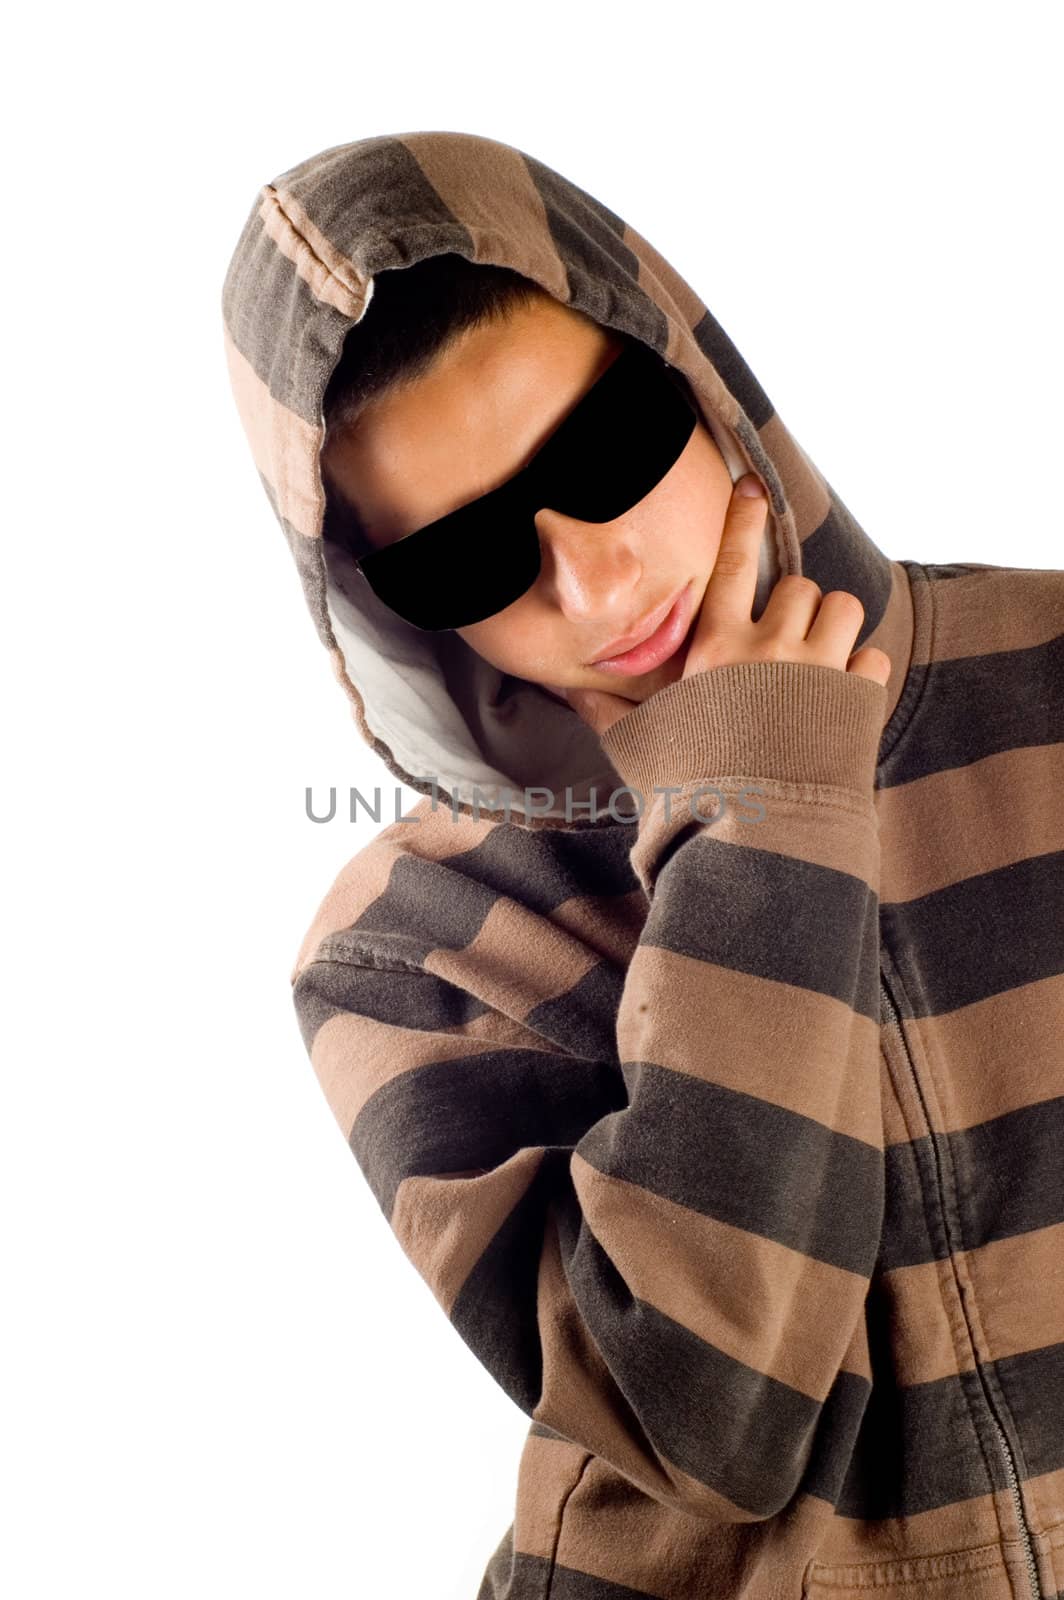 teenage boy is wearing sunglasses and thinking on white